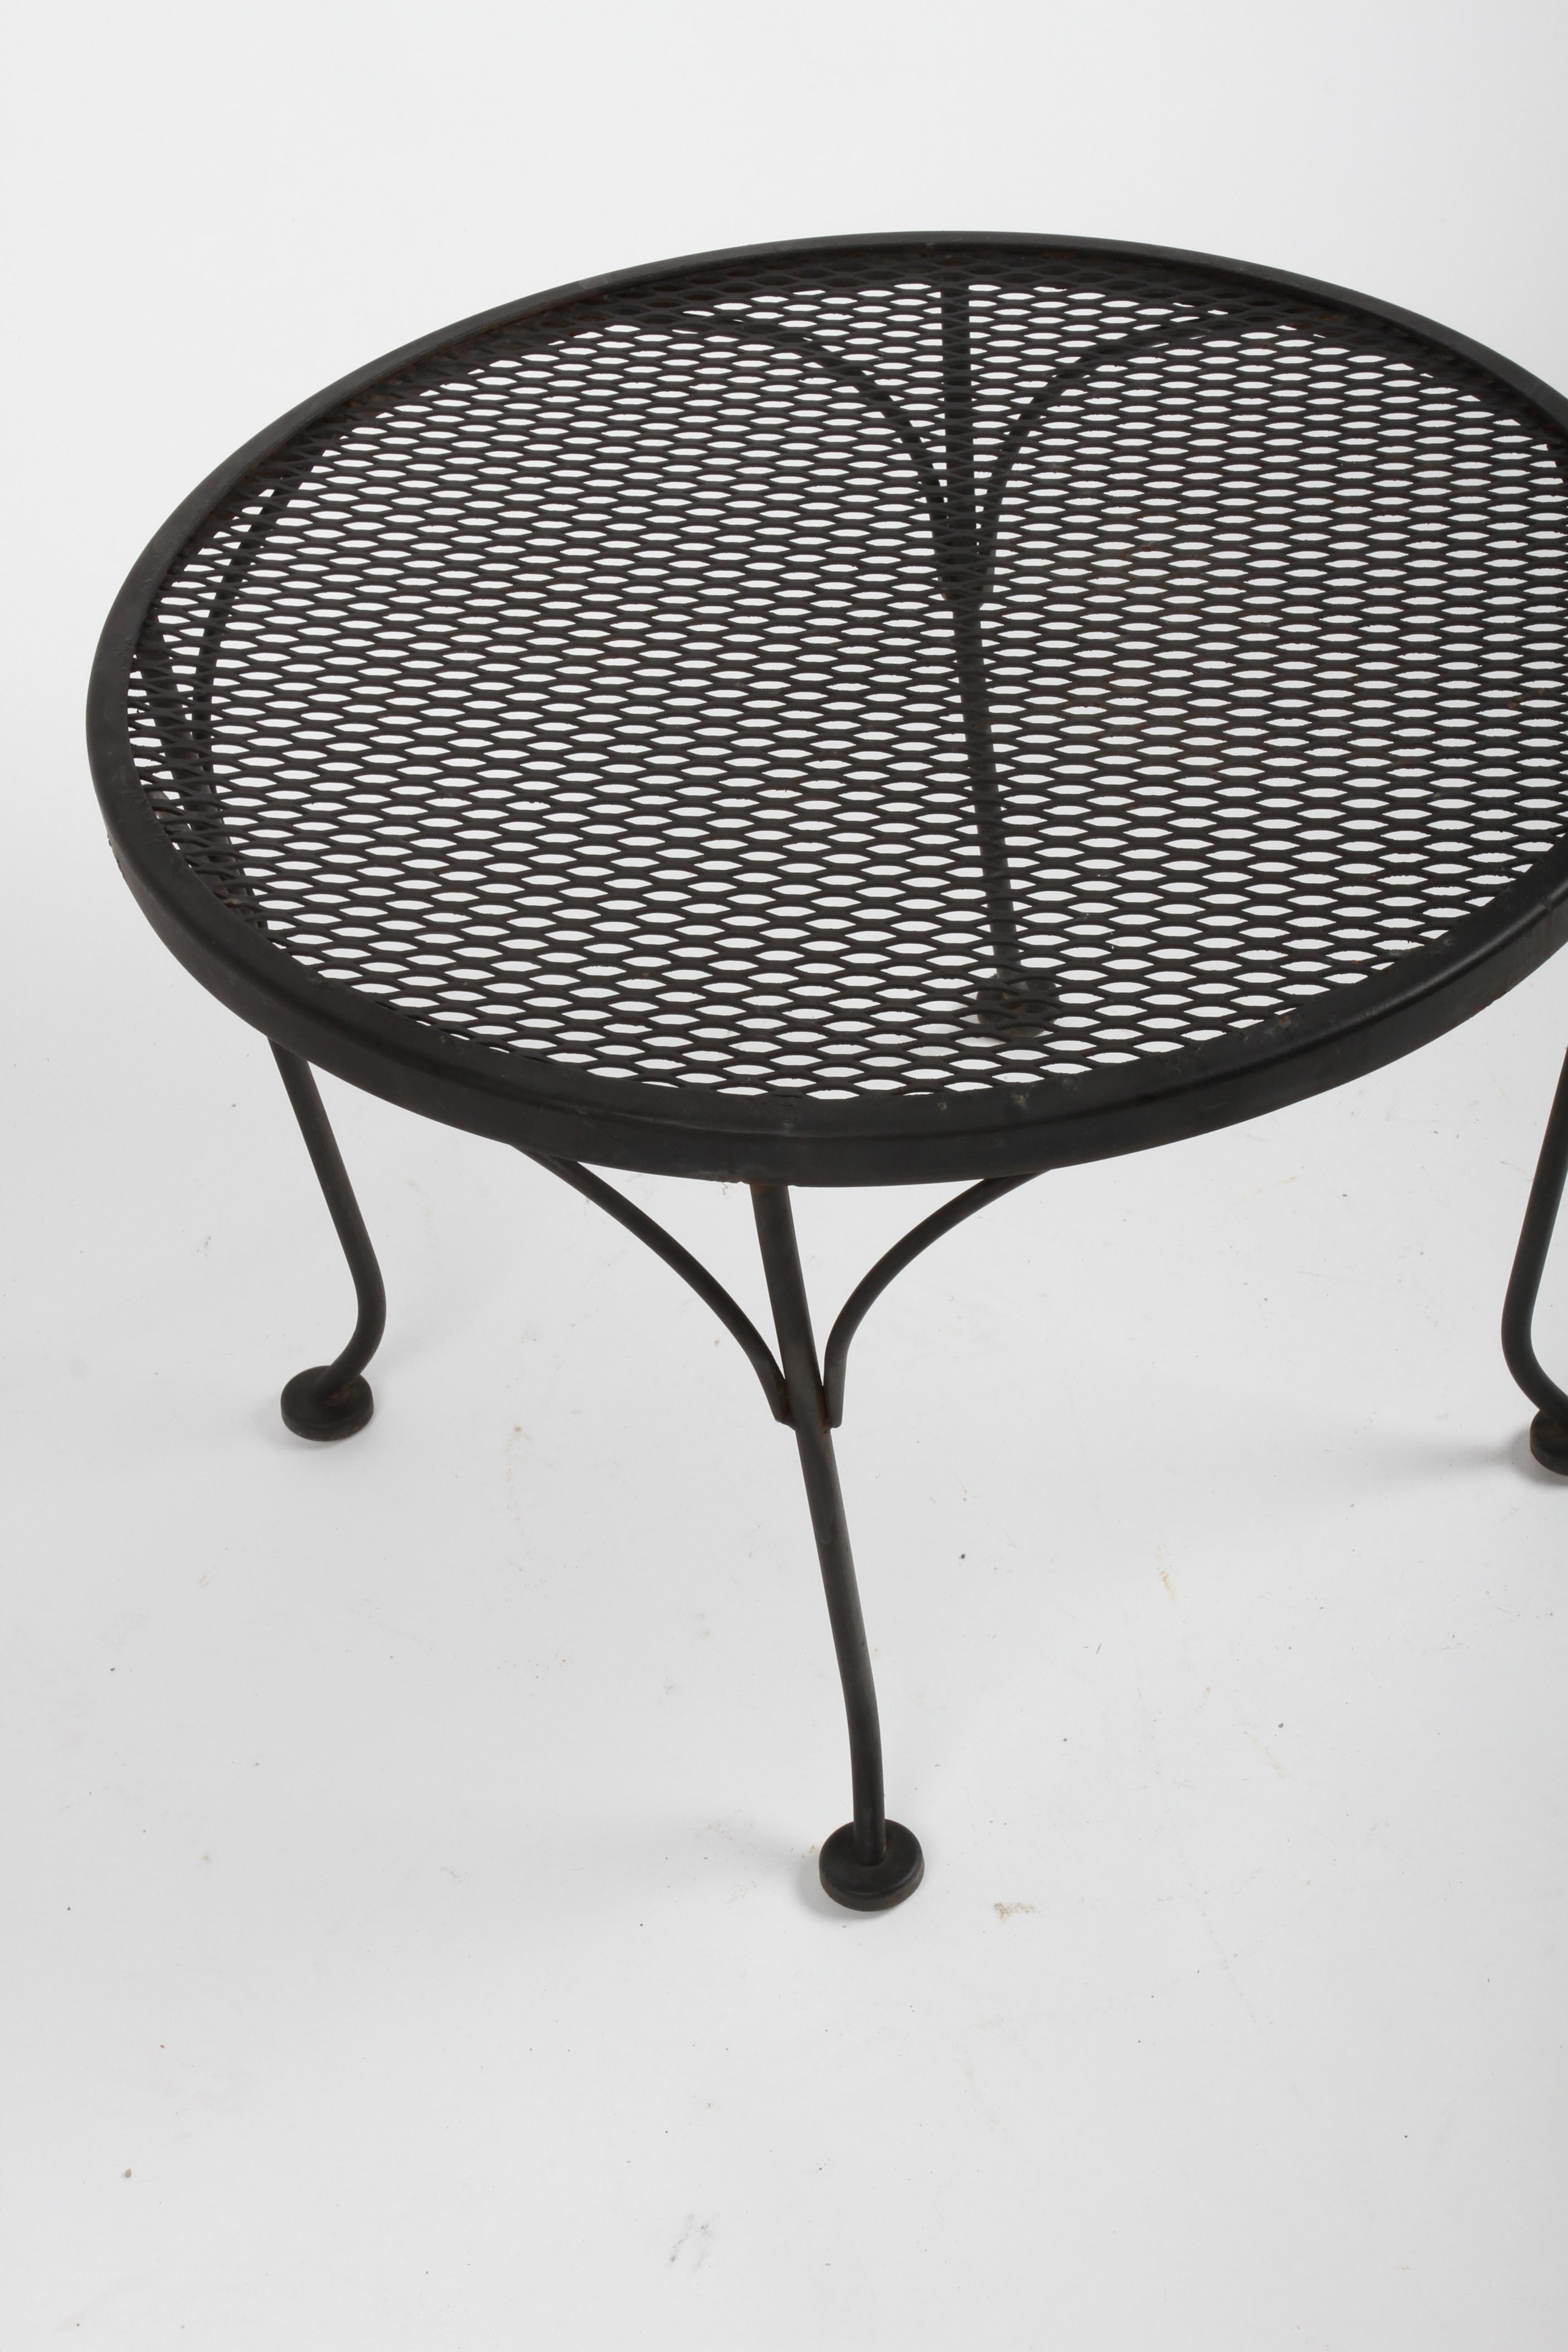 Russell Woodard Round Black Wrought Iron & Mesh Patio Coffee of Side Table 1